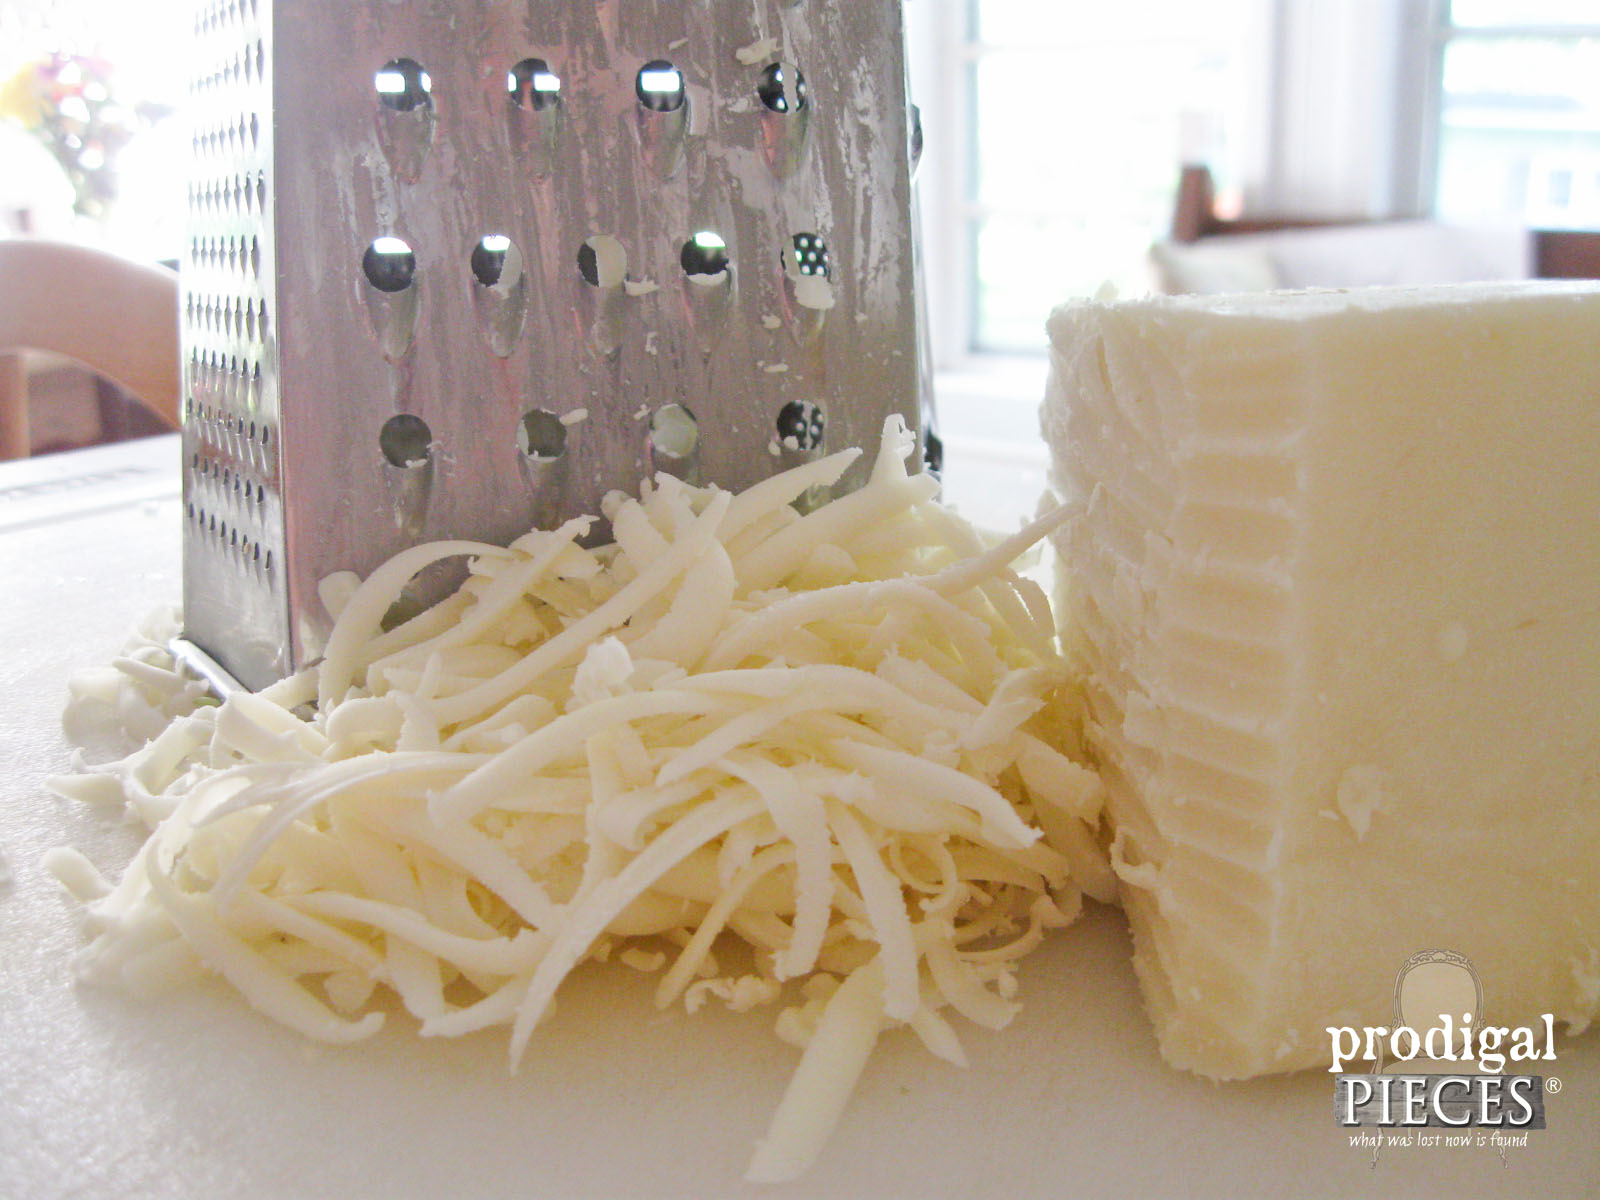 Grating Locally Raised and Cured Mozarella Cheese | Prodigal Pieces | www.prodigalpieces.com